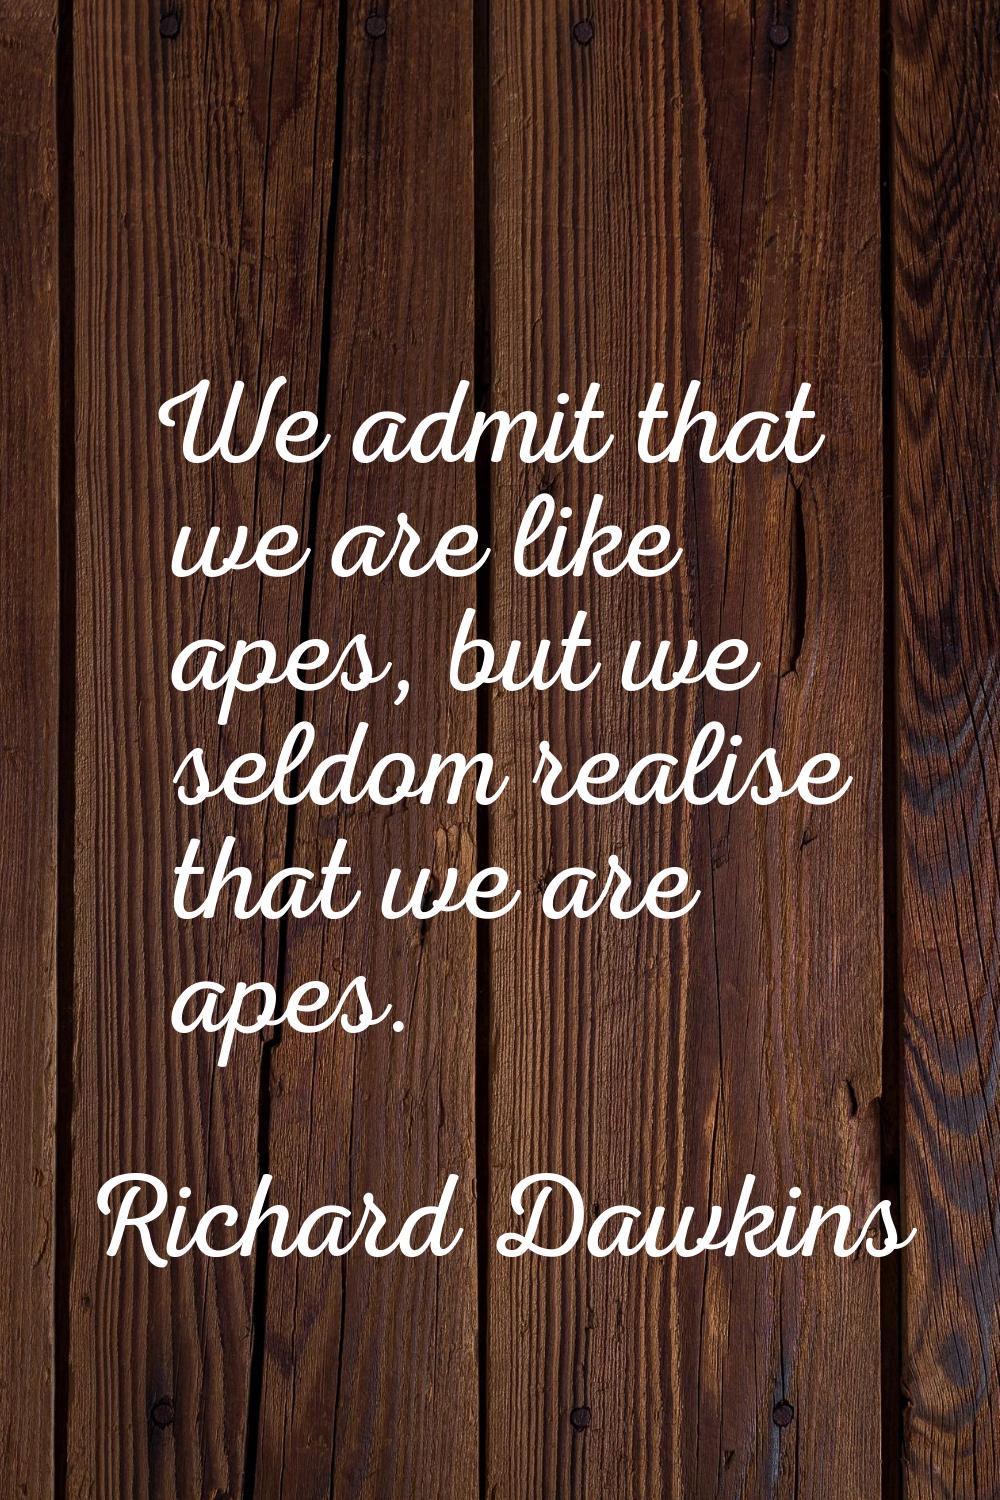 We admit that we are like apes, but we seldom realise that we are apes.